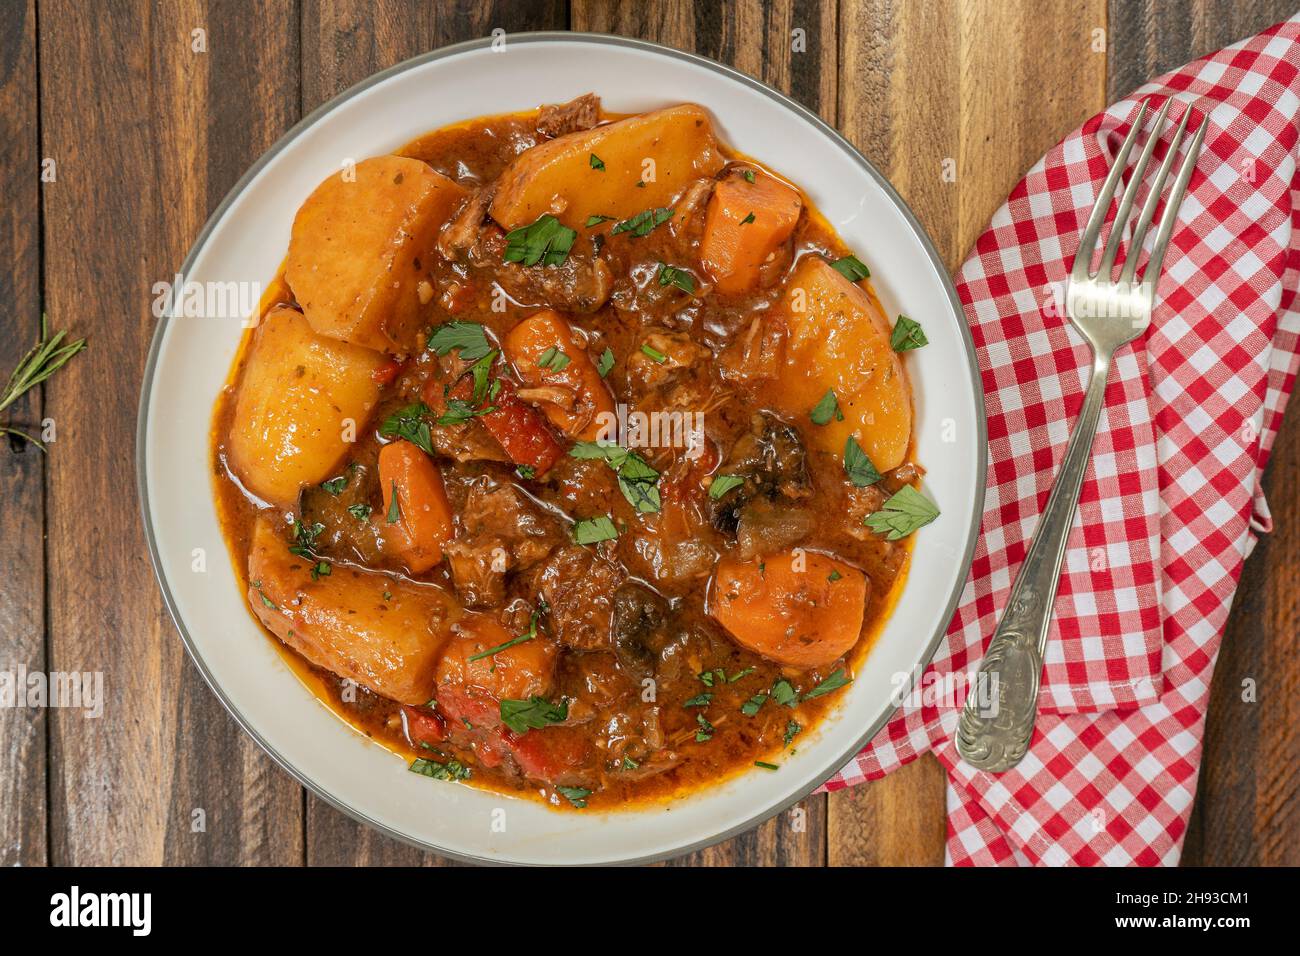 Aerial view of a plate with meat stew, potatoes and vegetables on a wooden table Stock Photo